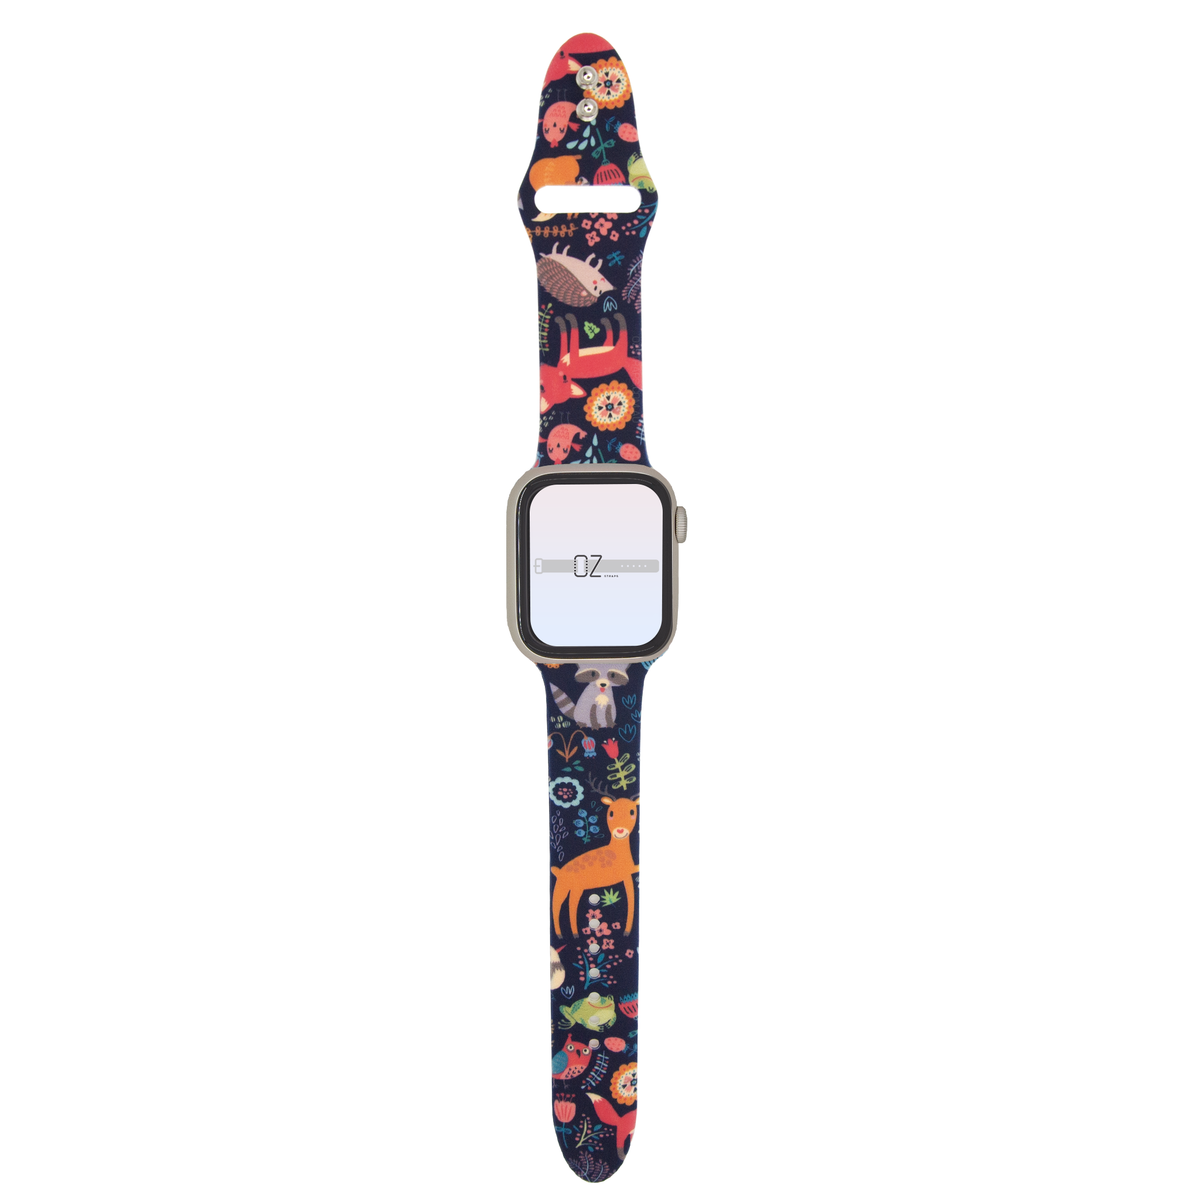 Themed Silicone Apple Watch Band